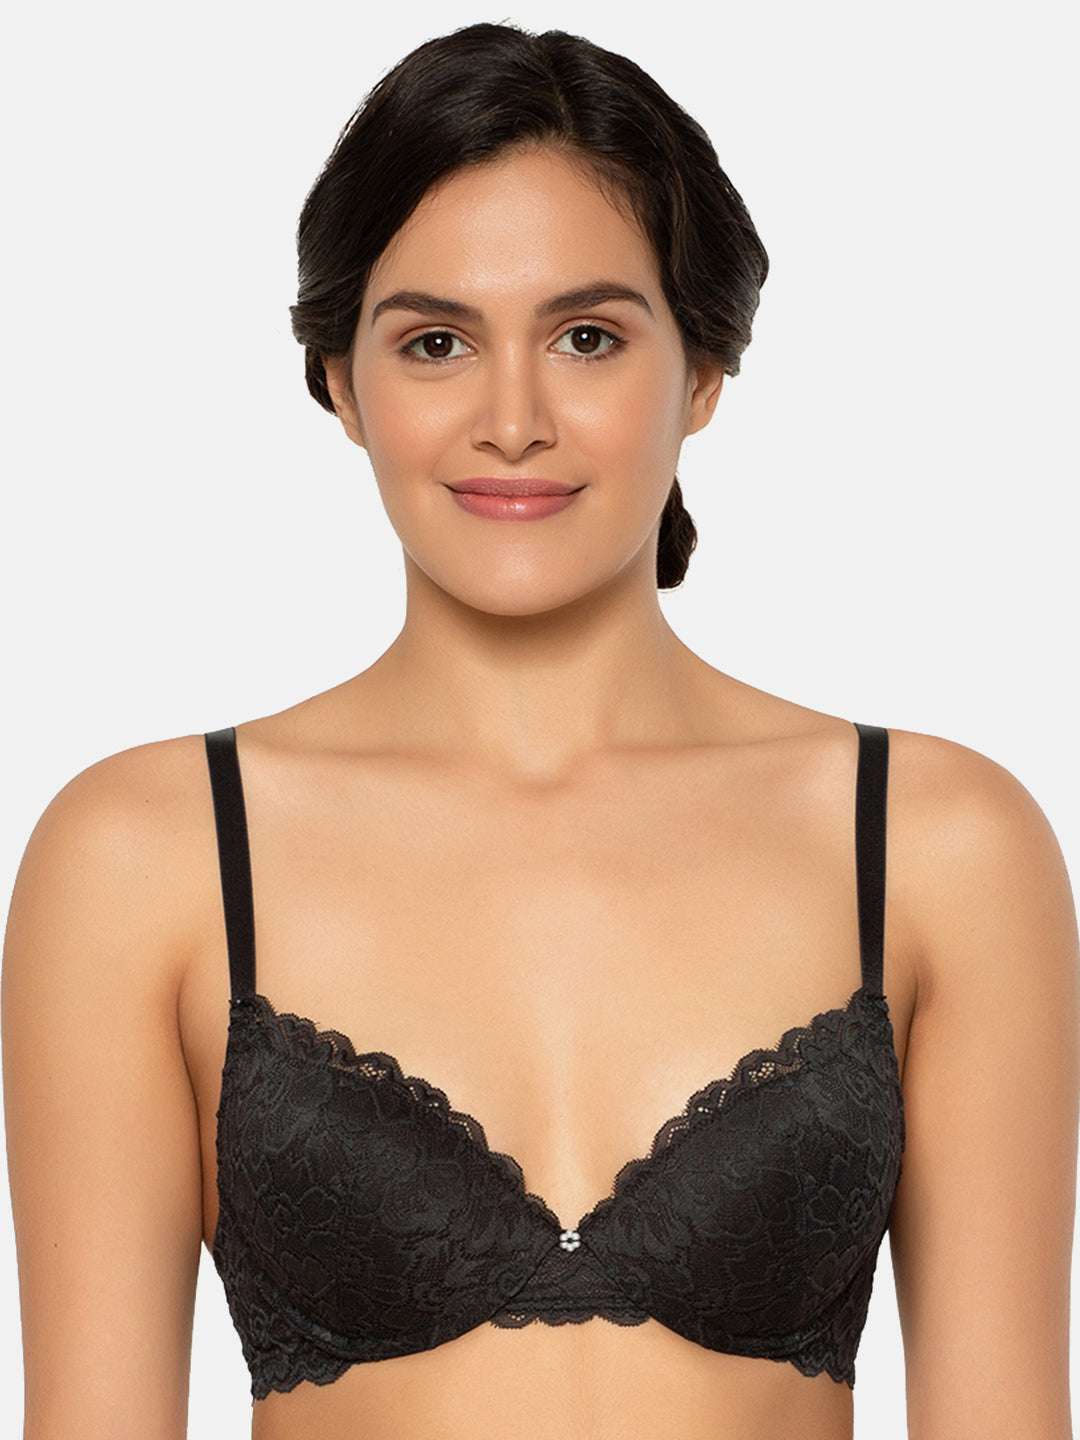 Pushlus Strapless Pushup Convertible Padded Lace Bra with India